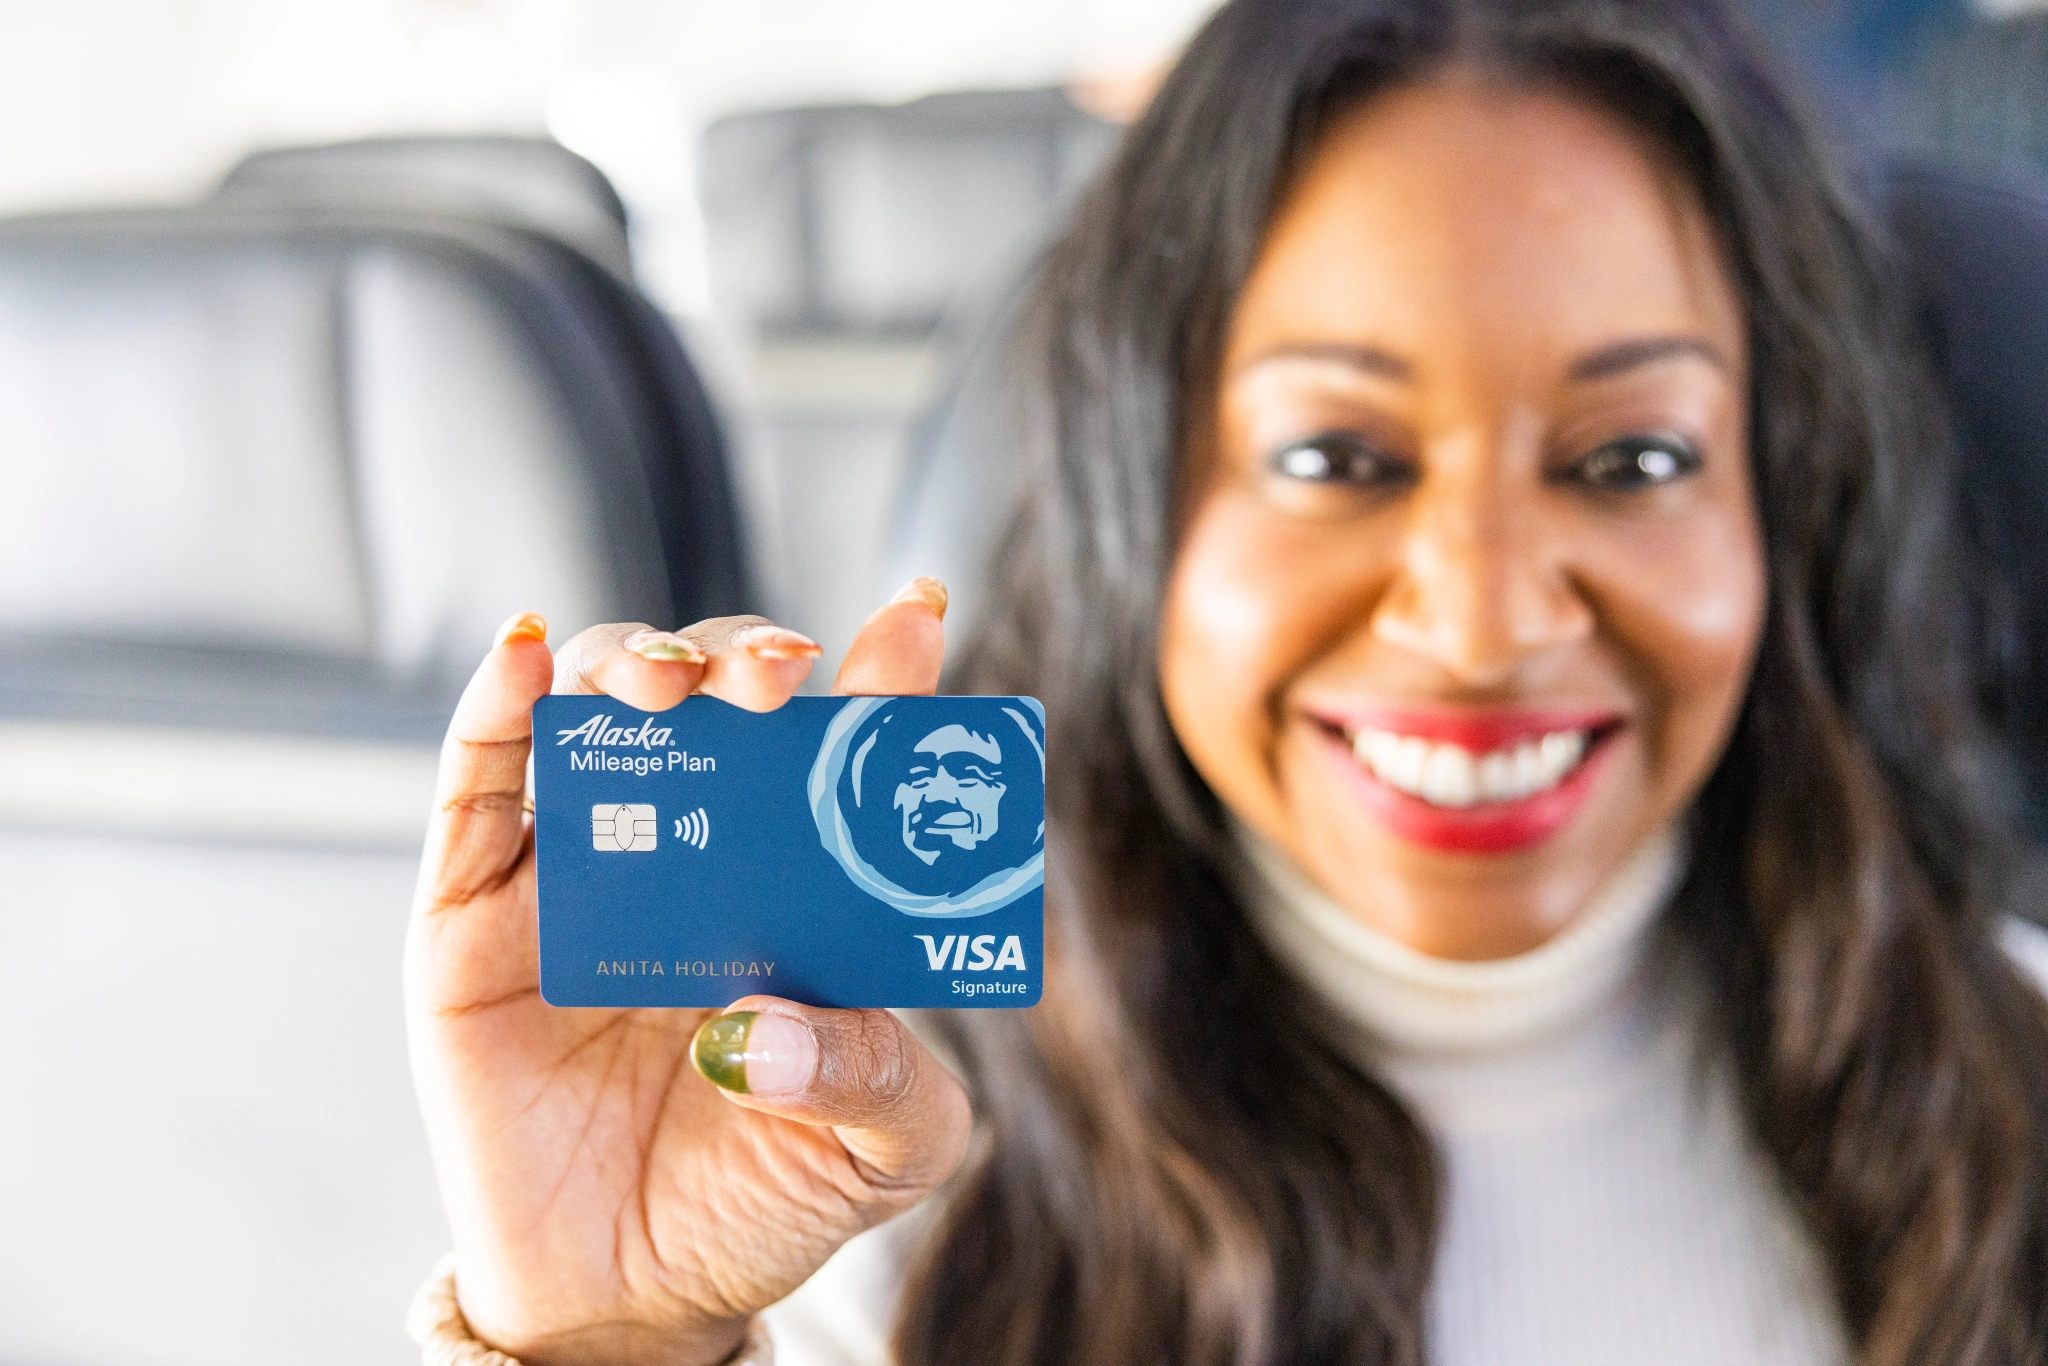 Alaska Airlines and Bank of America Announce New Benefits for Cardholders